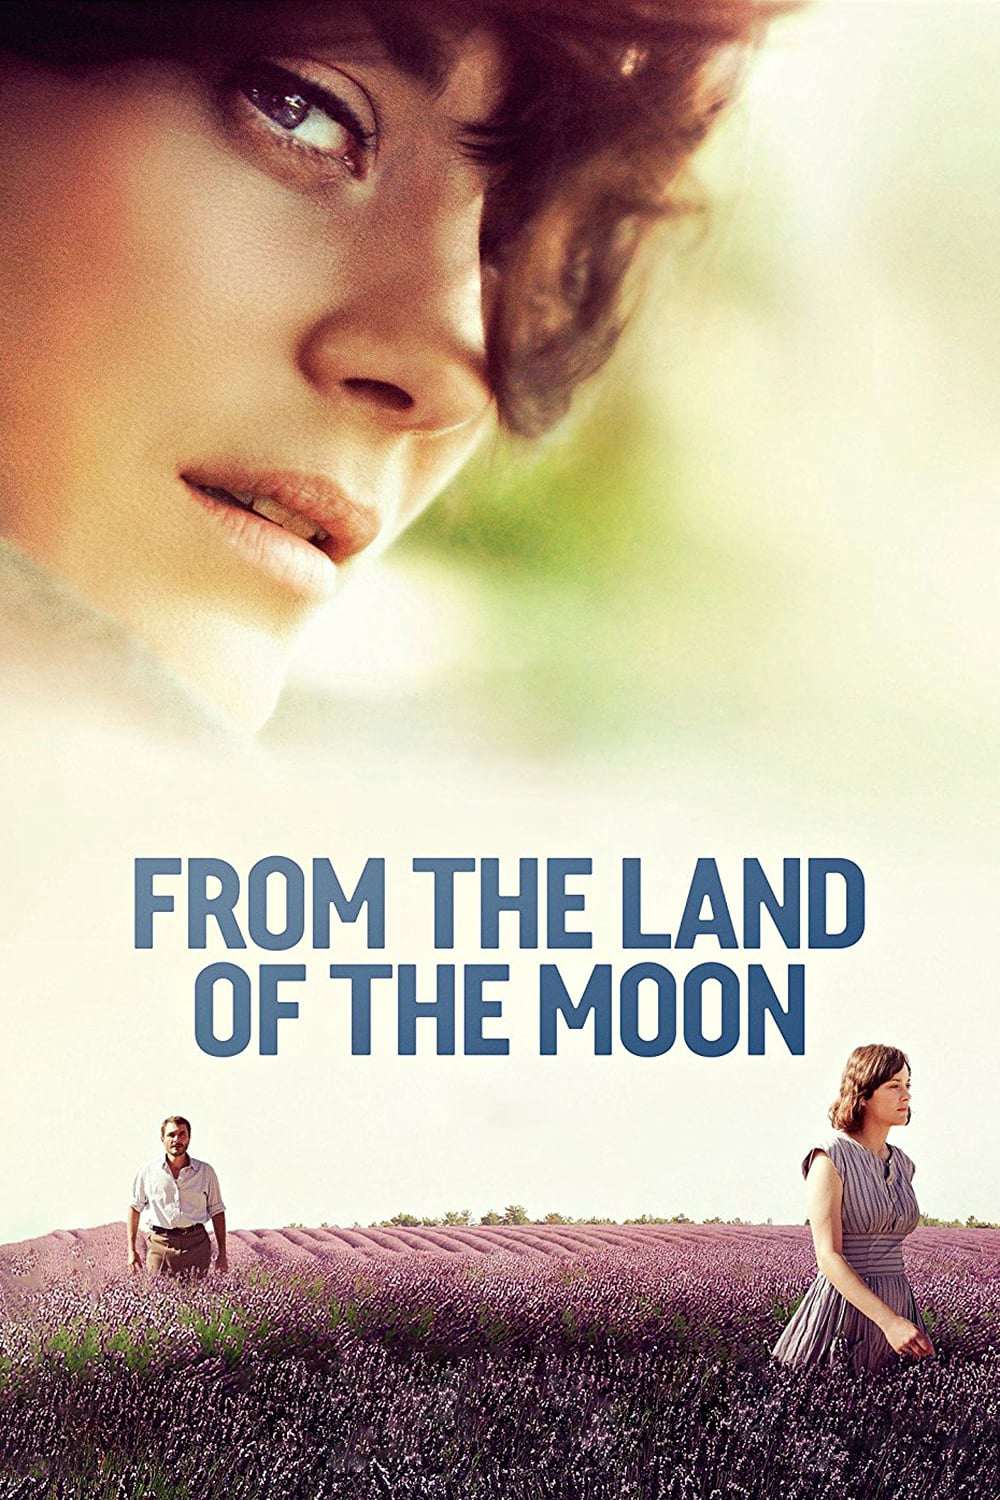 Poster Phim Miền Đất Thơ Mộng (From the Land of the Moon)